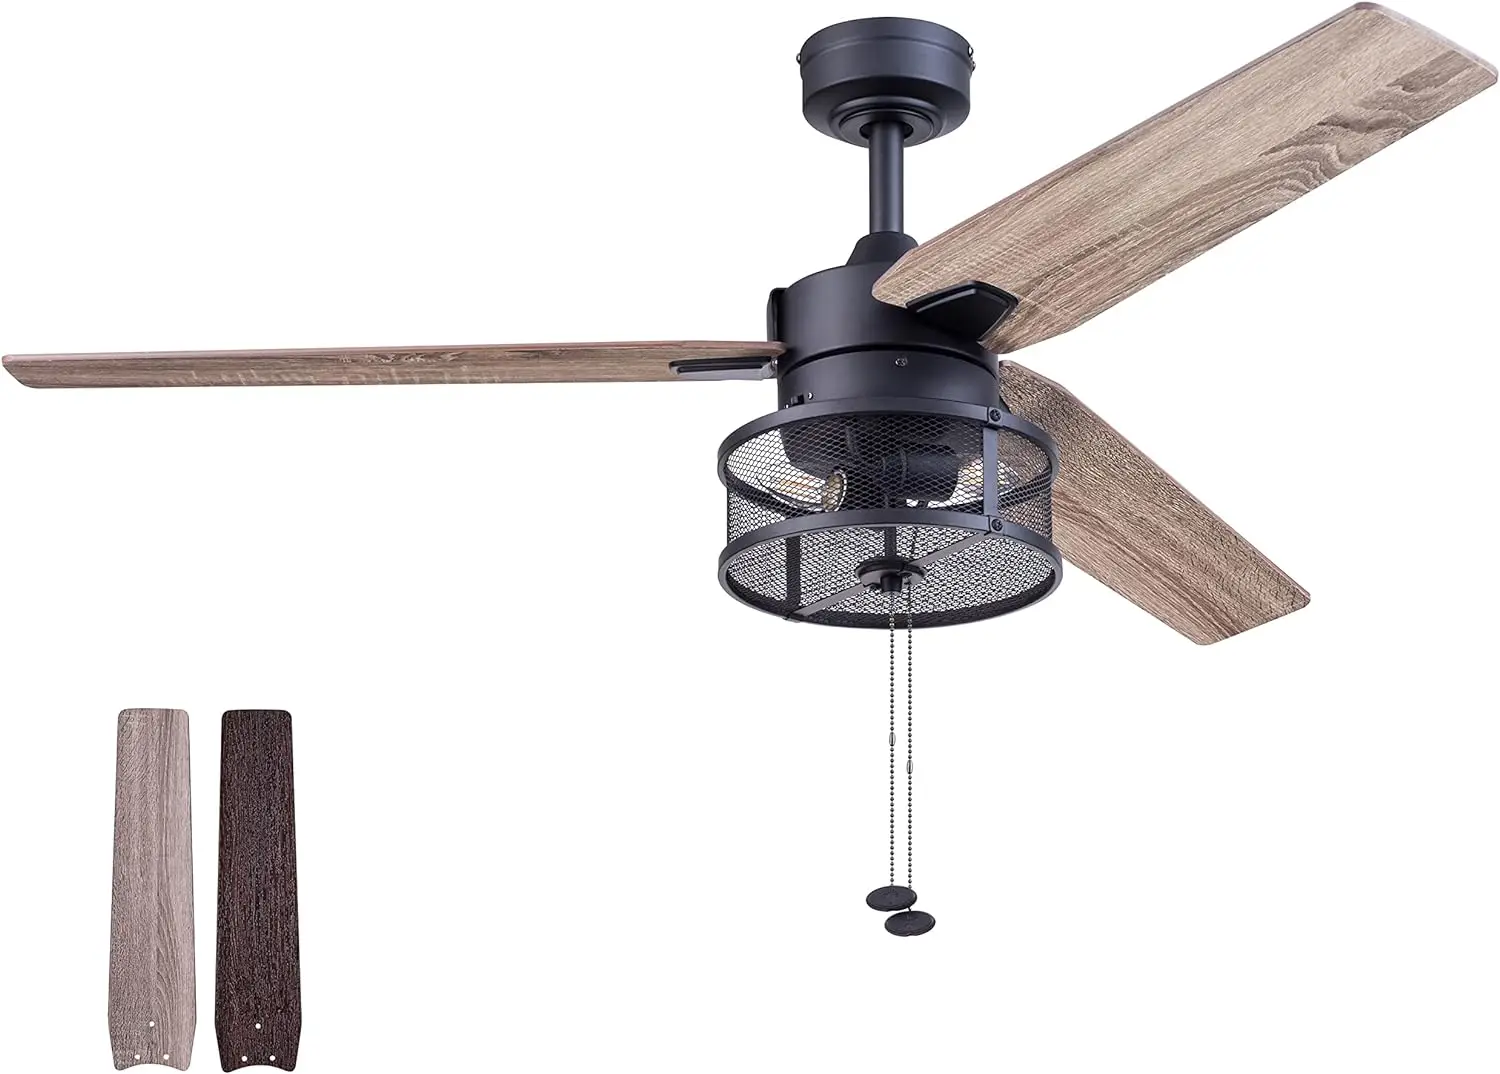 

Sytarra Industrial Modern Farmhouse Ceiling Fan, 3-Blade Contemporary, LED Cage Light, Propeller Style, Matte Black Finish, 5166